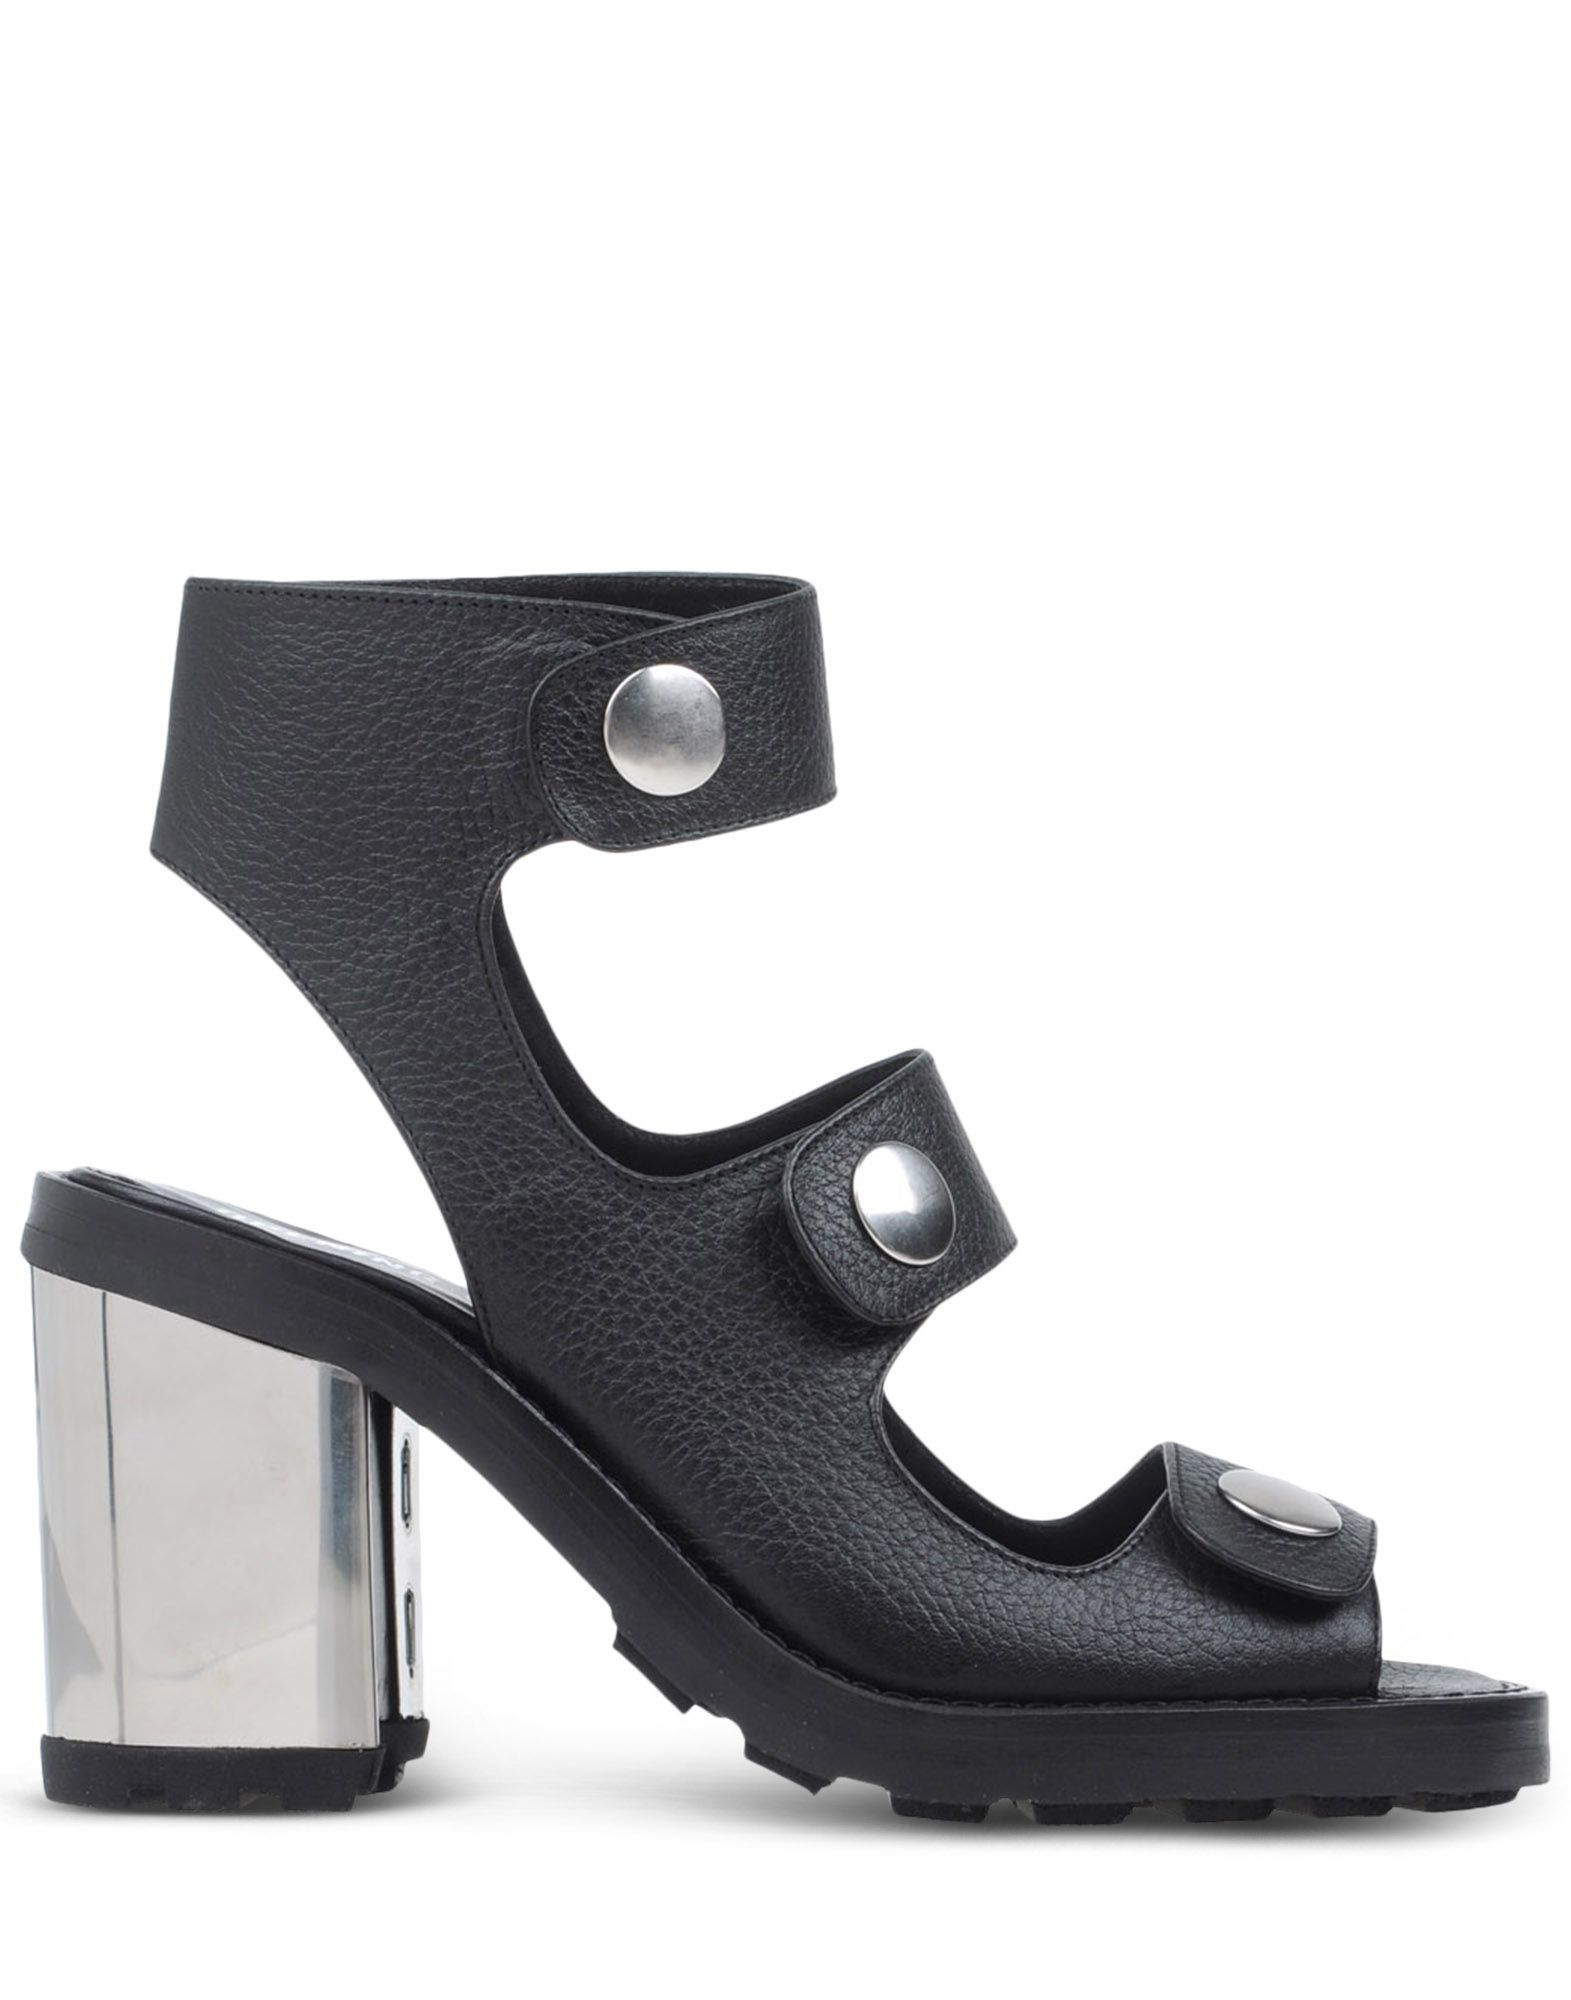 Lyst - Opening Ceremony Sandals in Black